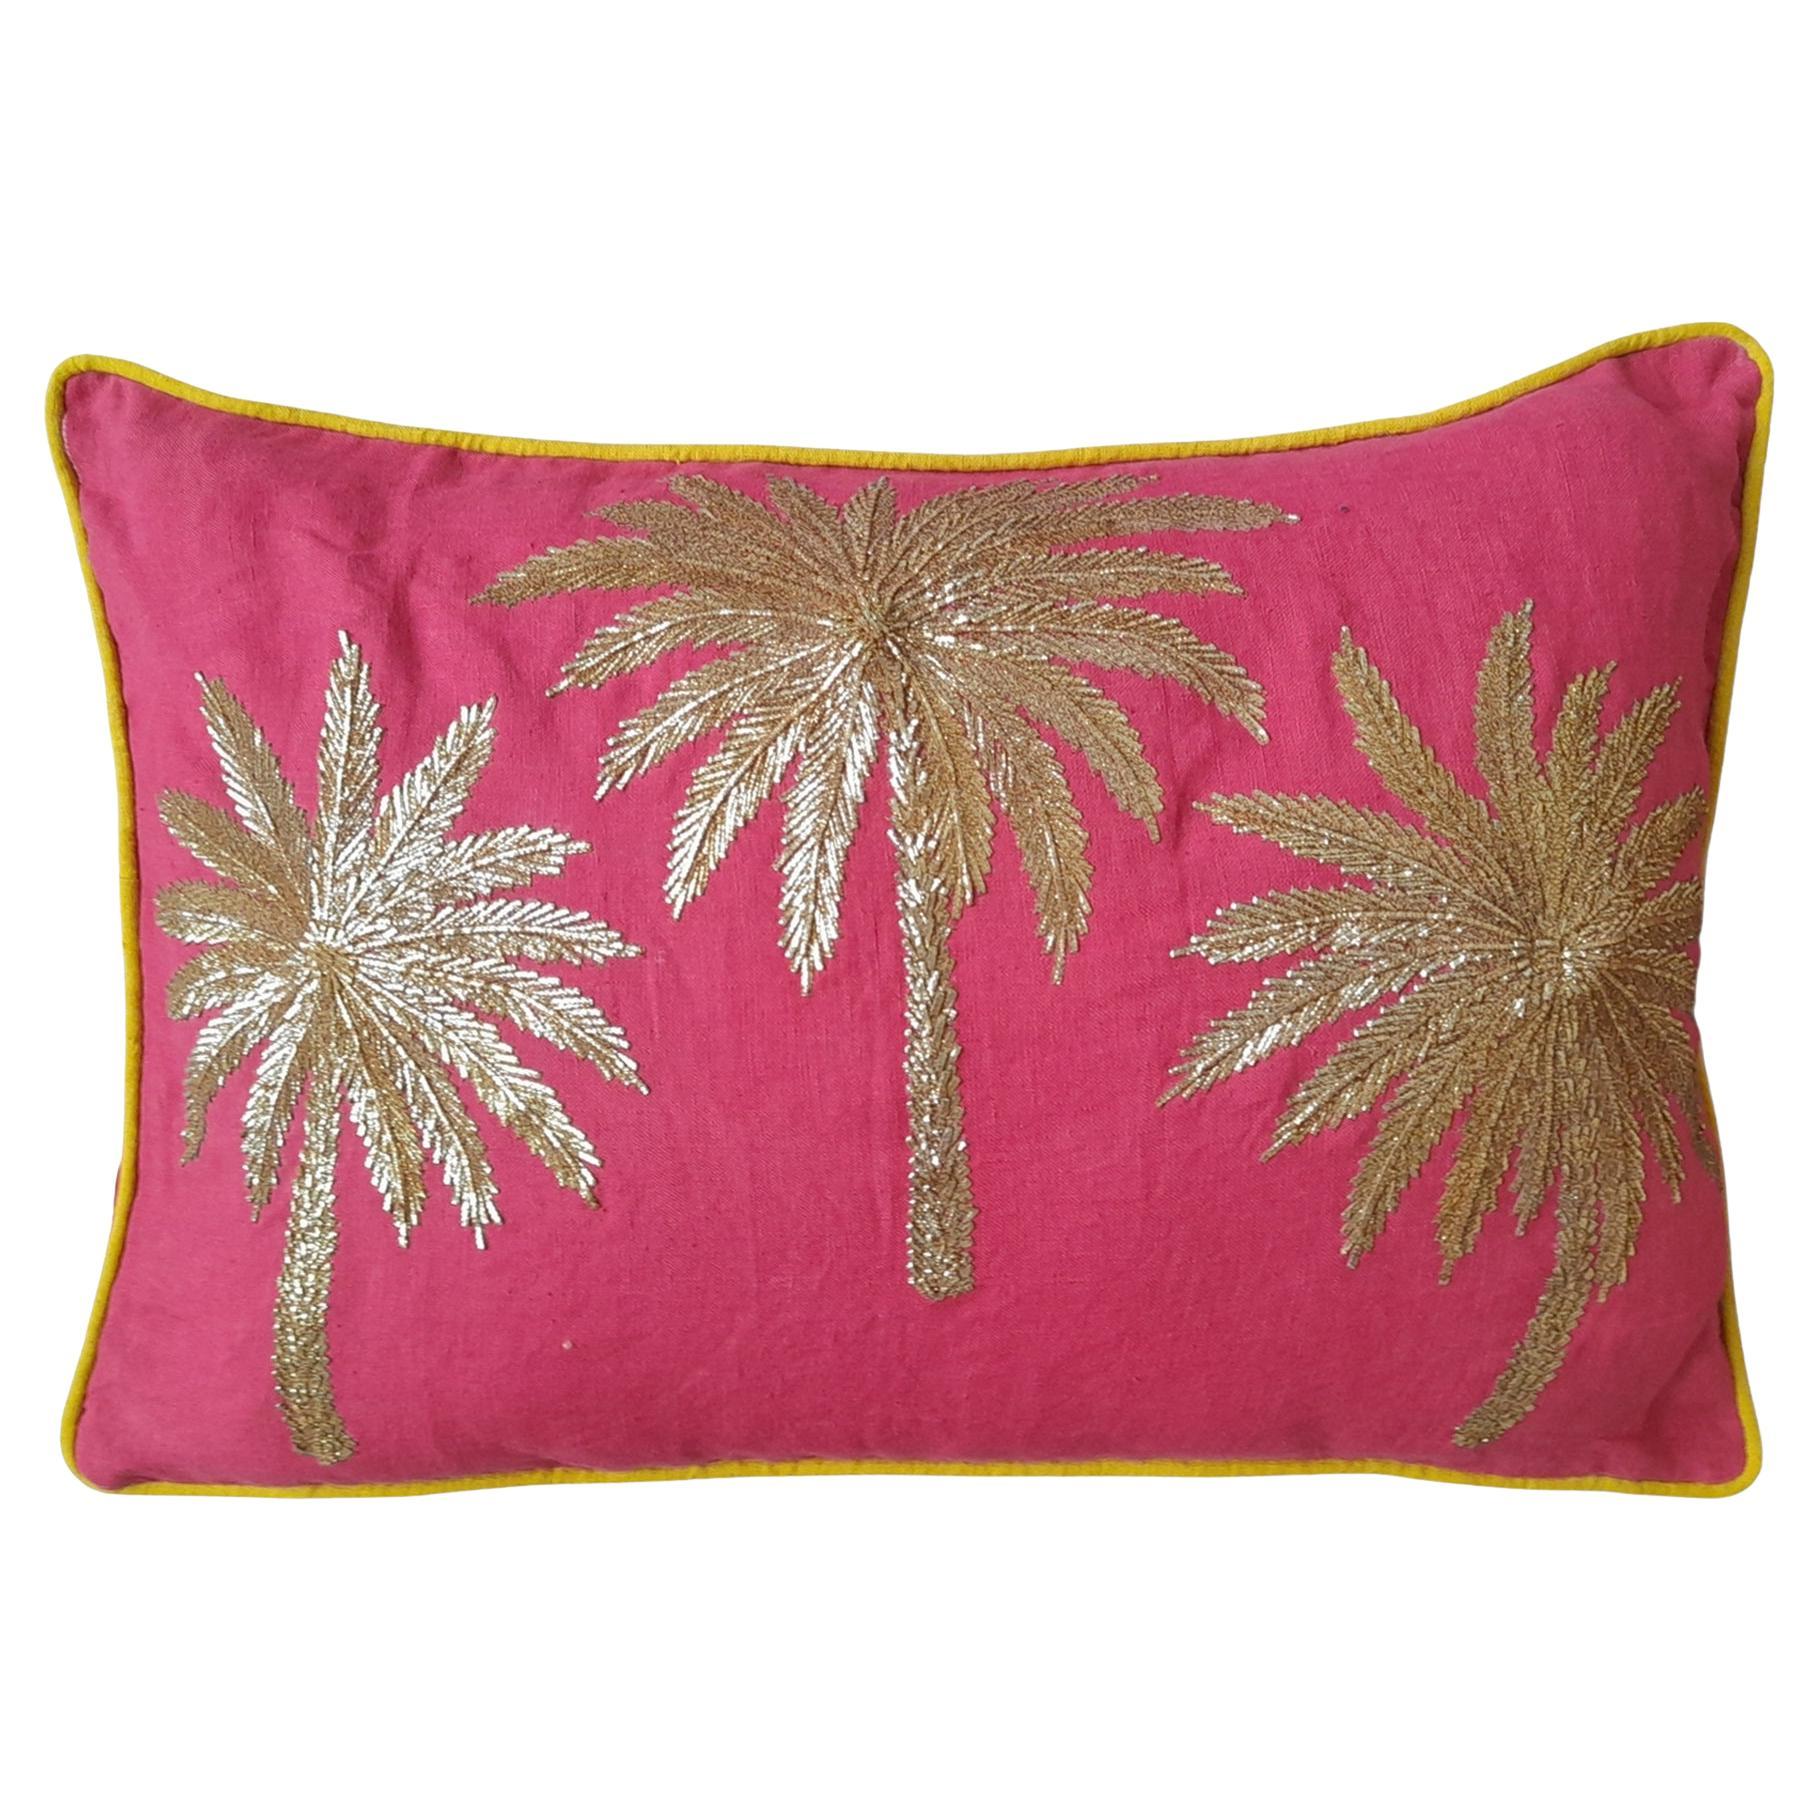 HandEmbroidered palm trees linen pillow 